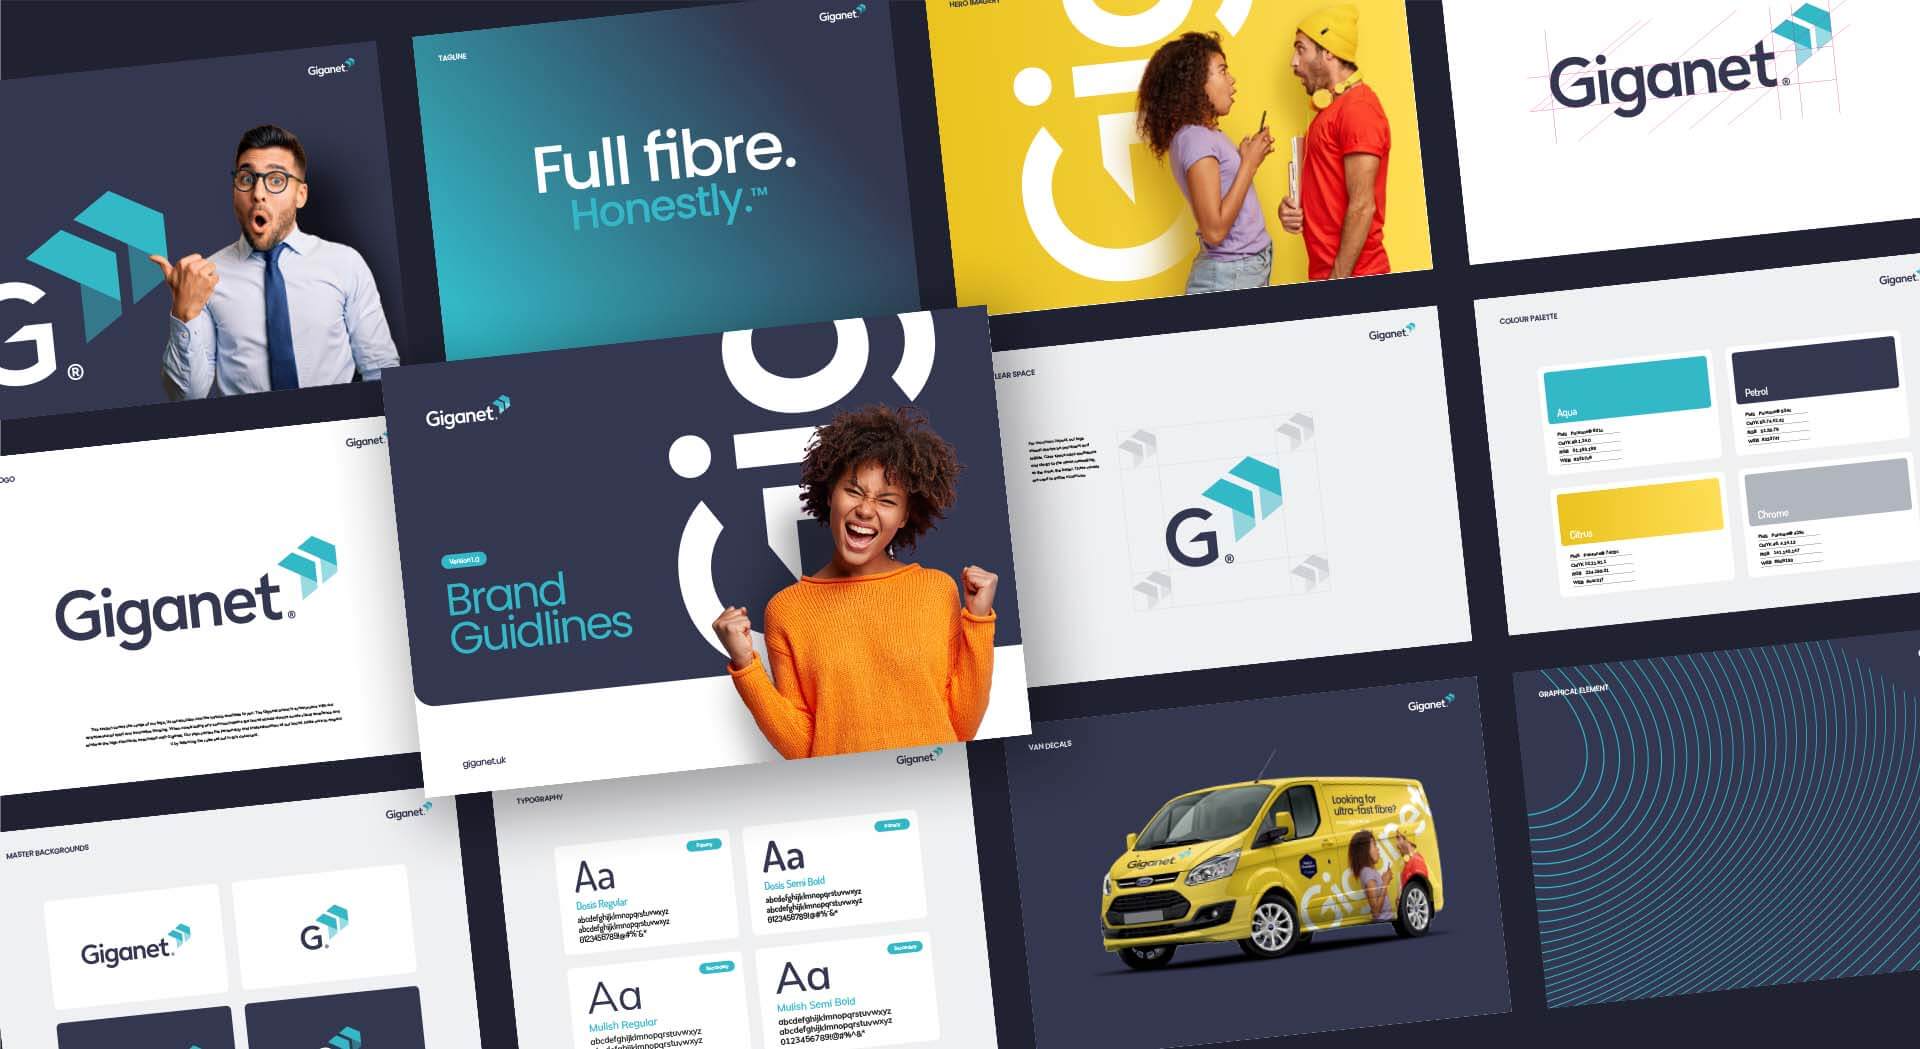 Giganet's brand guidelines created by Crux Design Agency